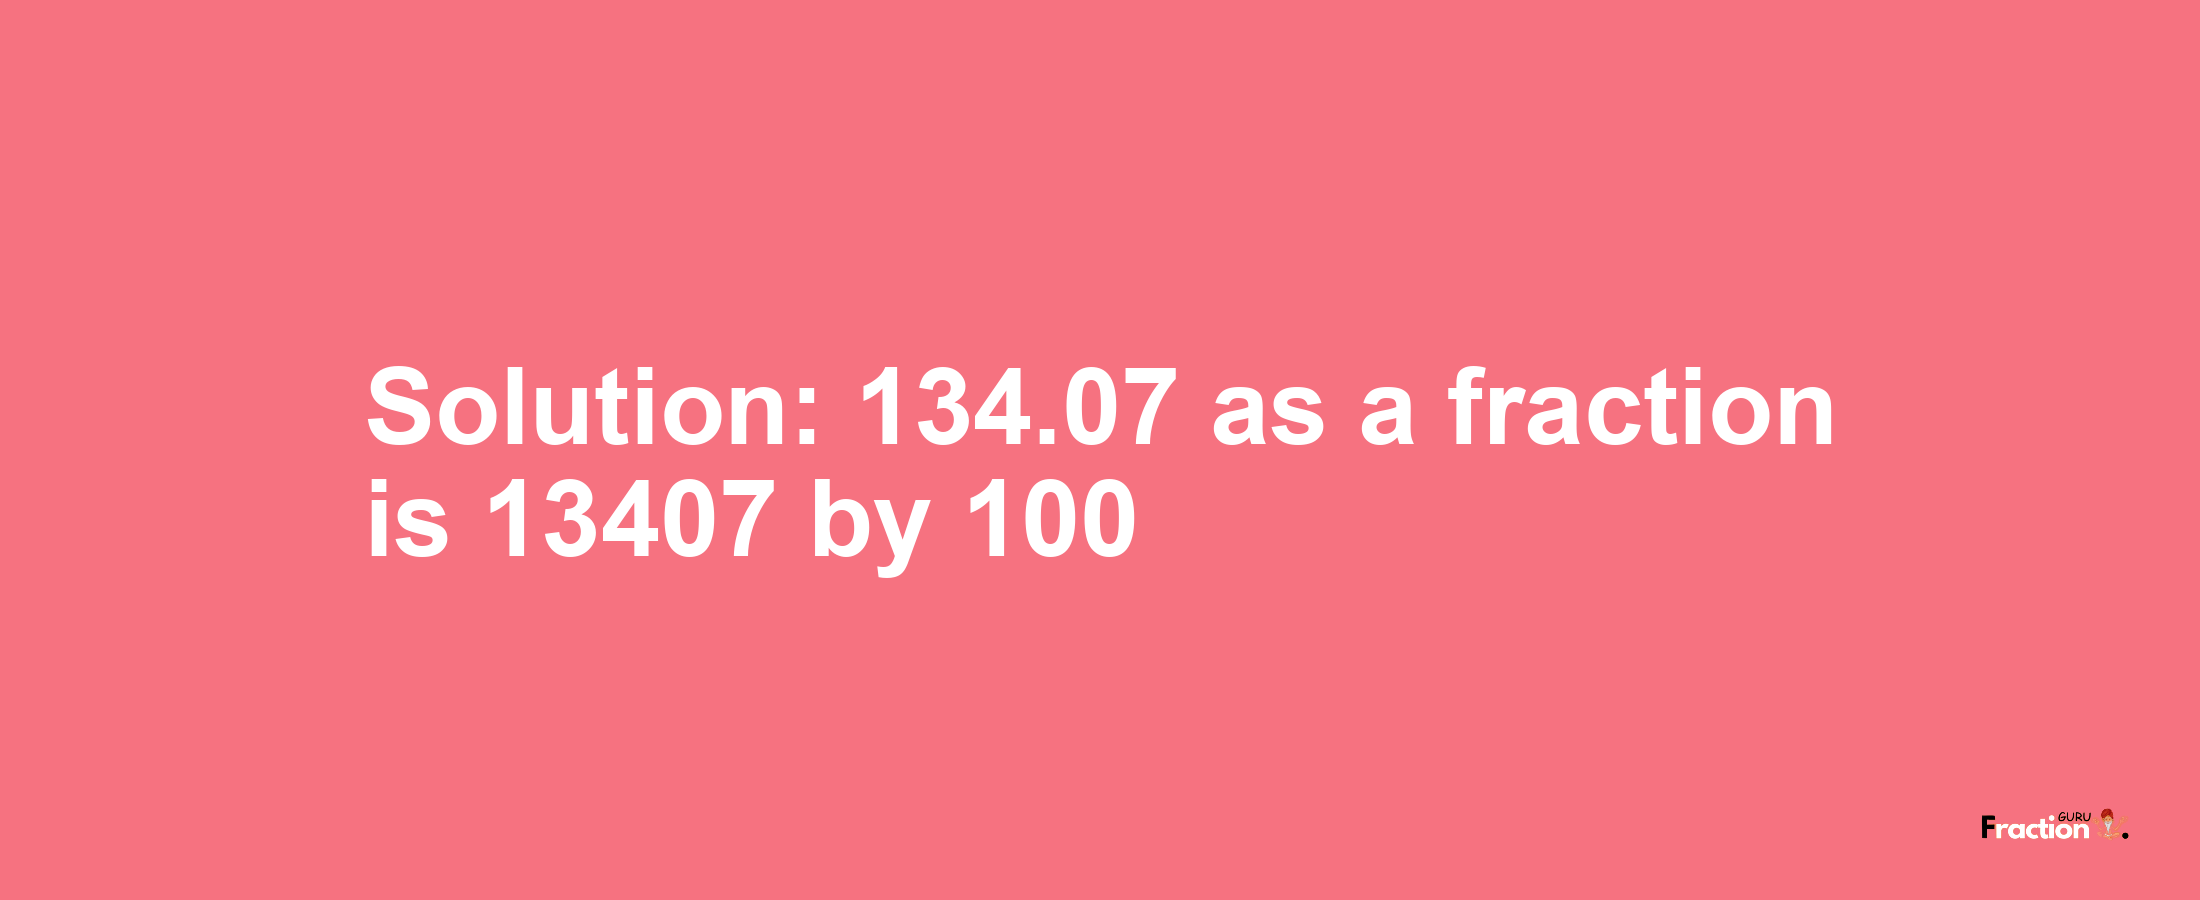 Solution:134.07 as a fraction is 13407/100